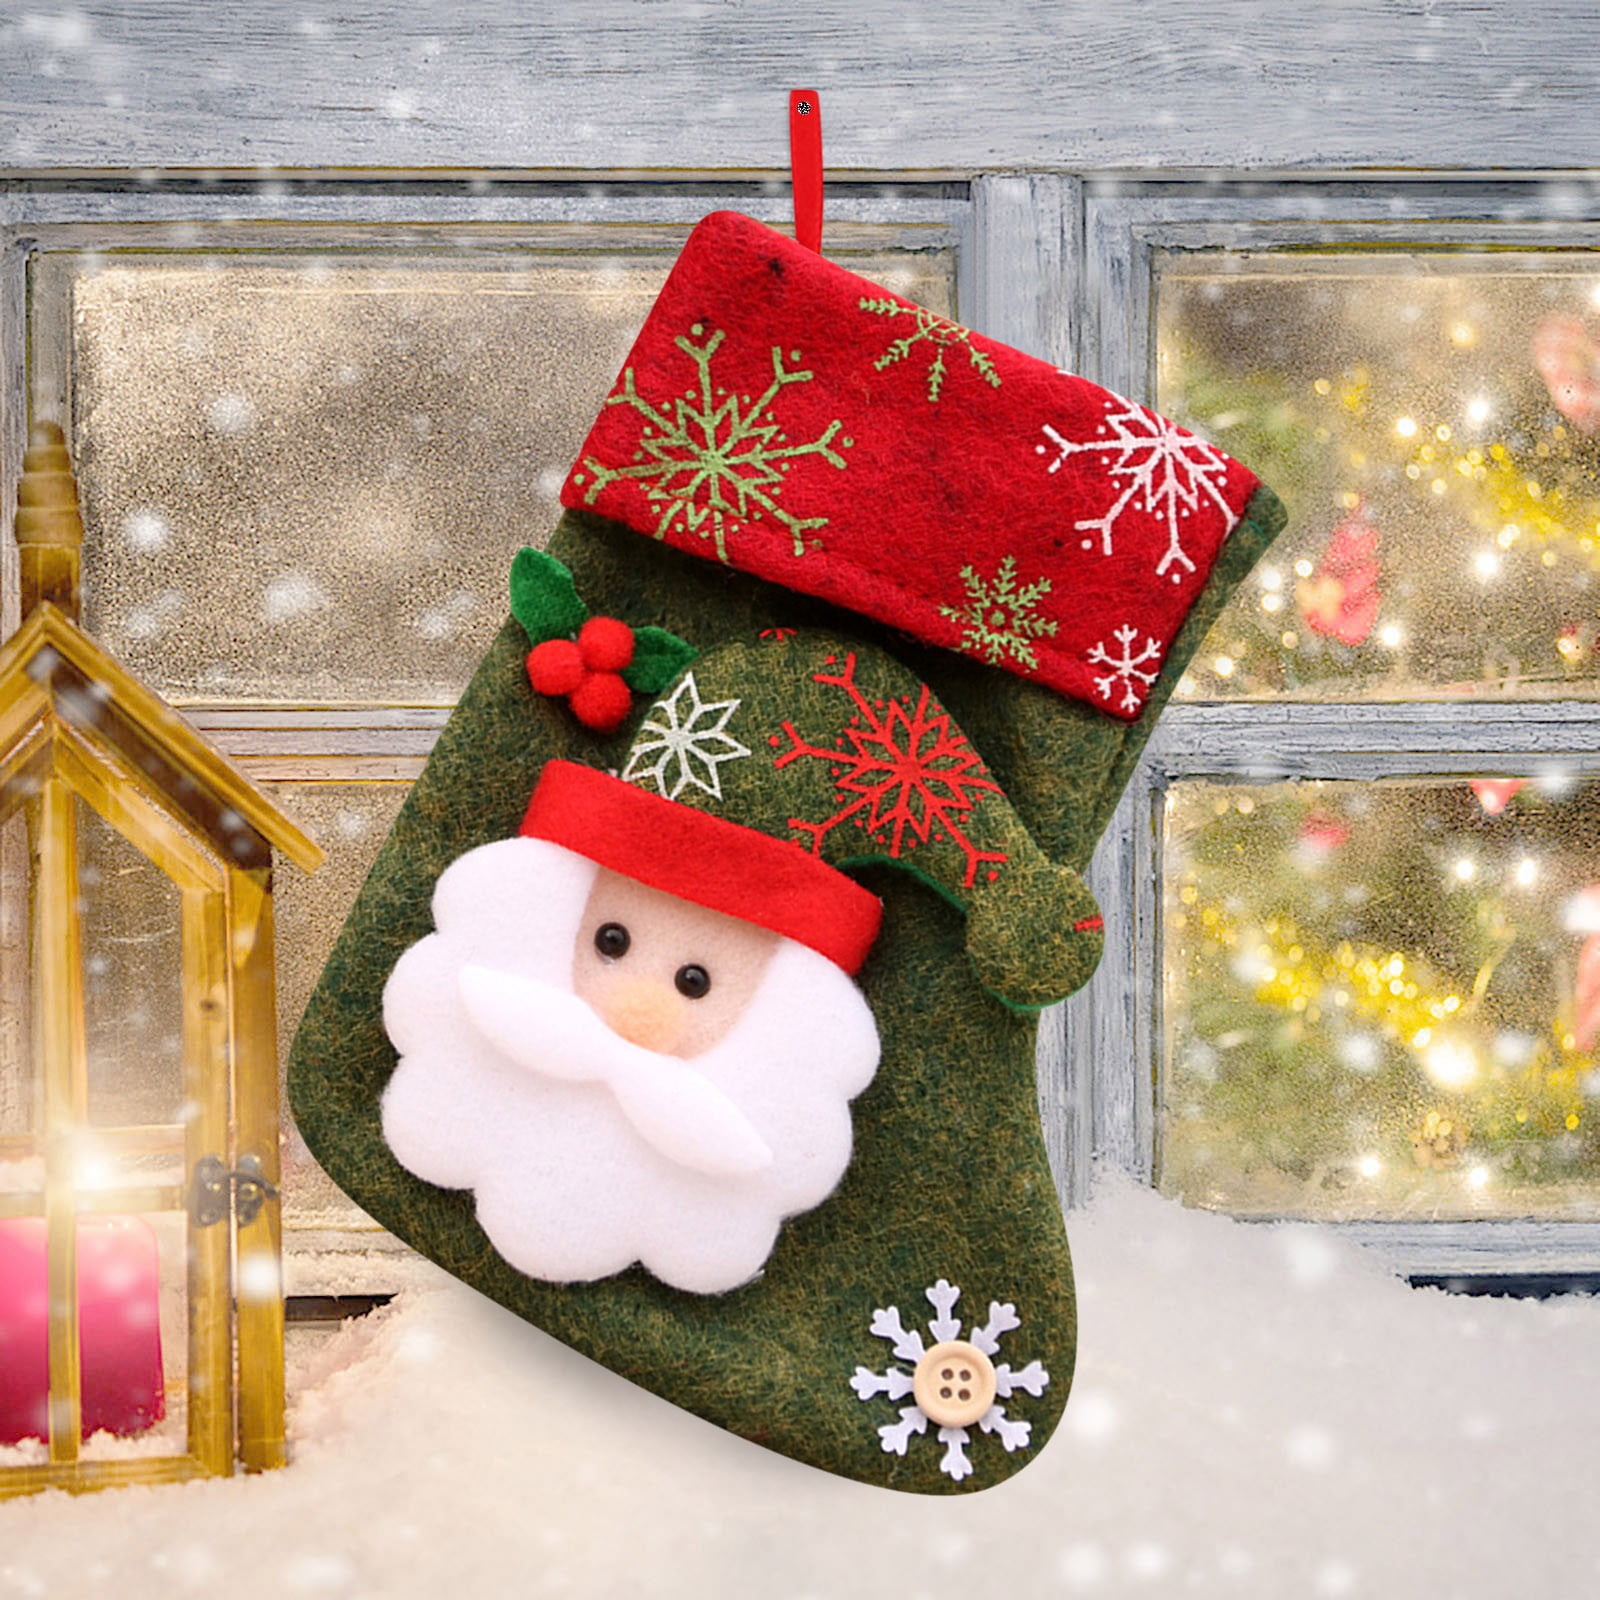 Details about   Christmas Stocking Santa Claus Candy Sock Bag Xmas Tree Hanging Decor Gift FC 